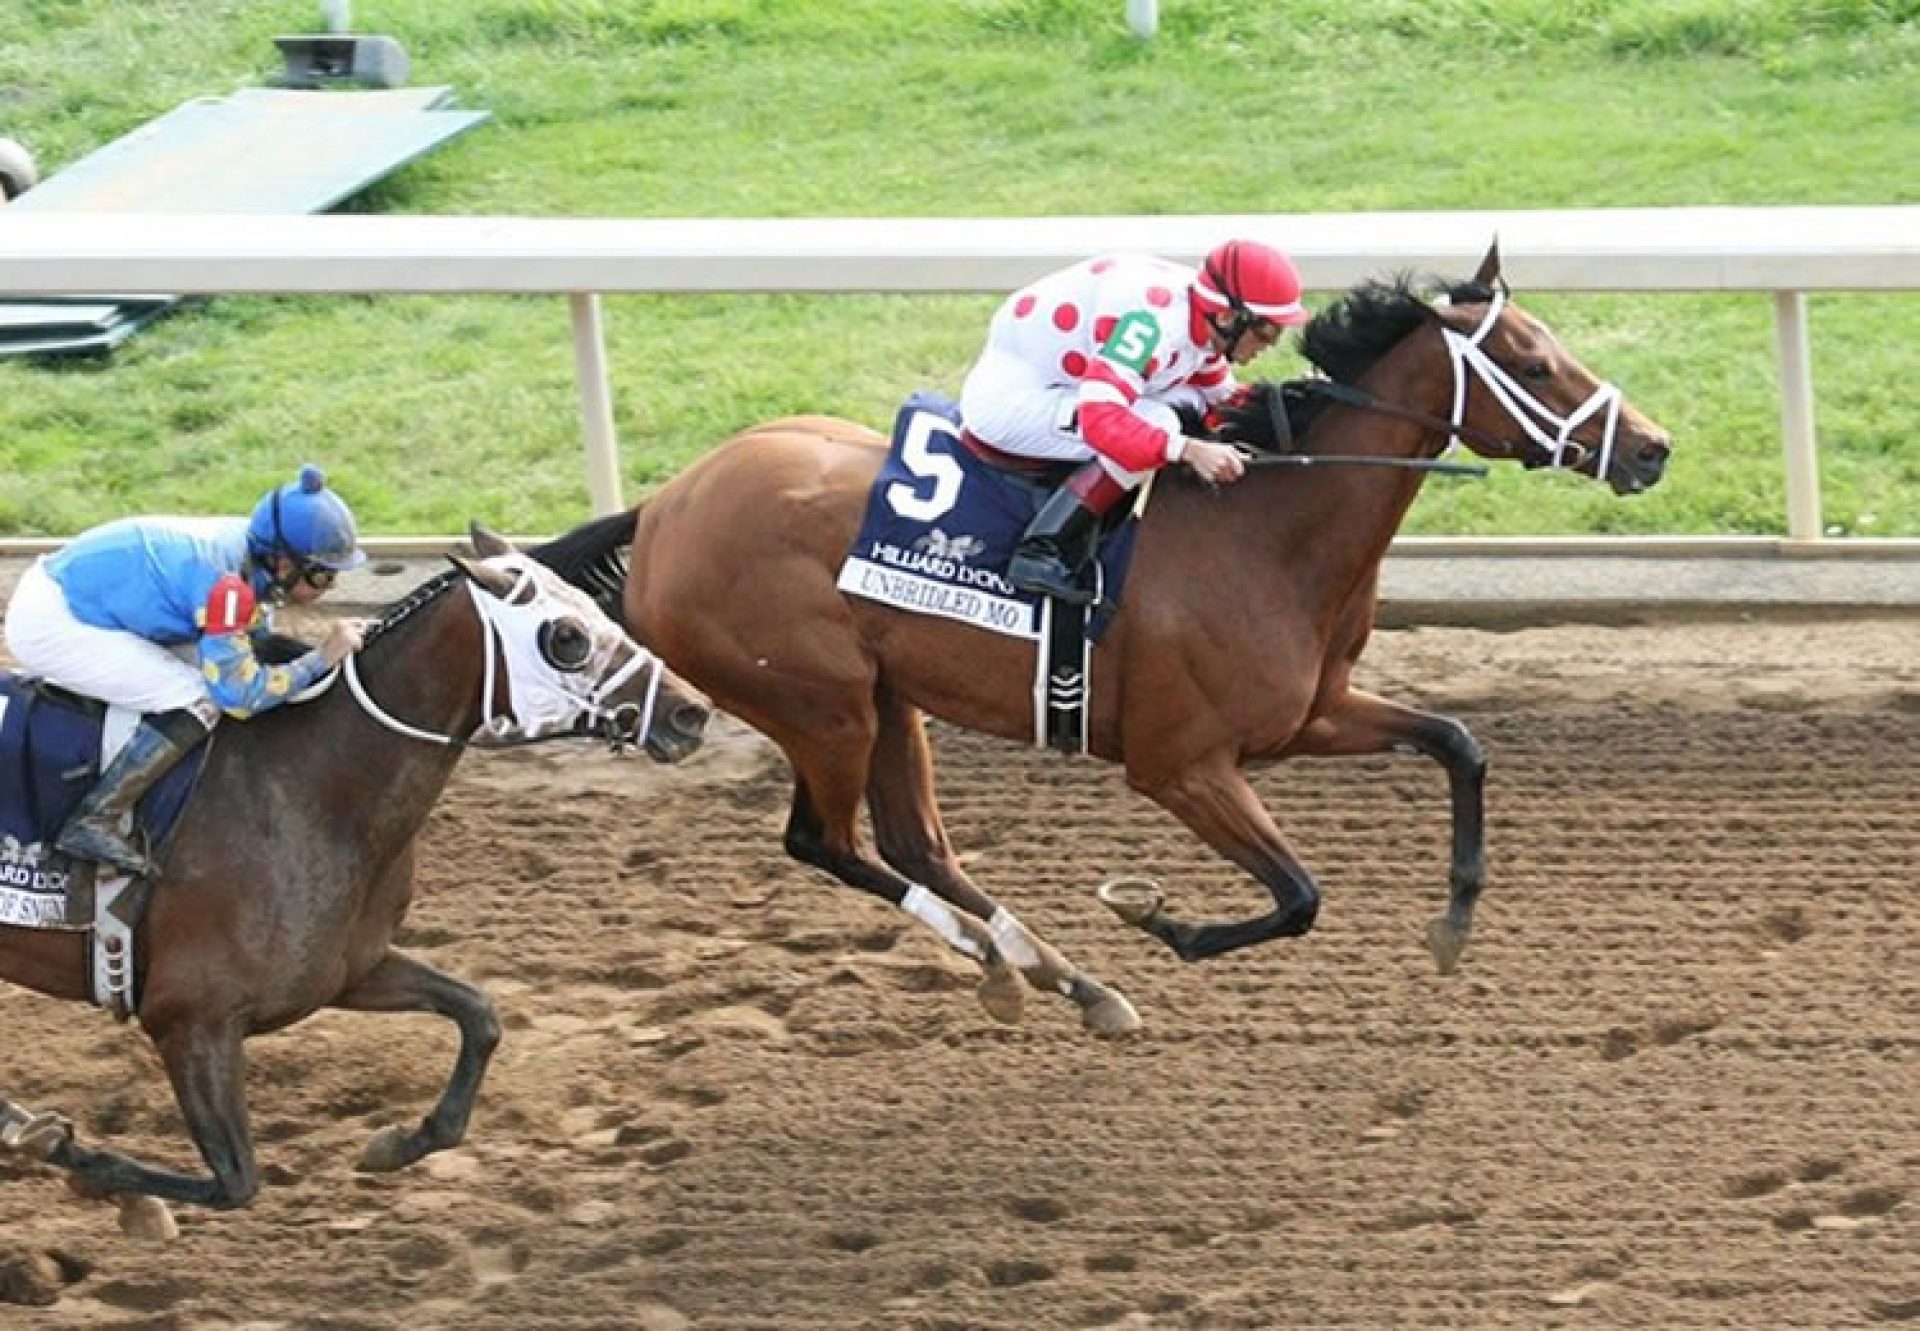 Unbridled Mo (Uncle Mo) G1 Apple Blossom Handicap at Oaklawn